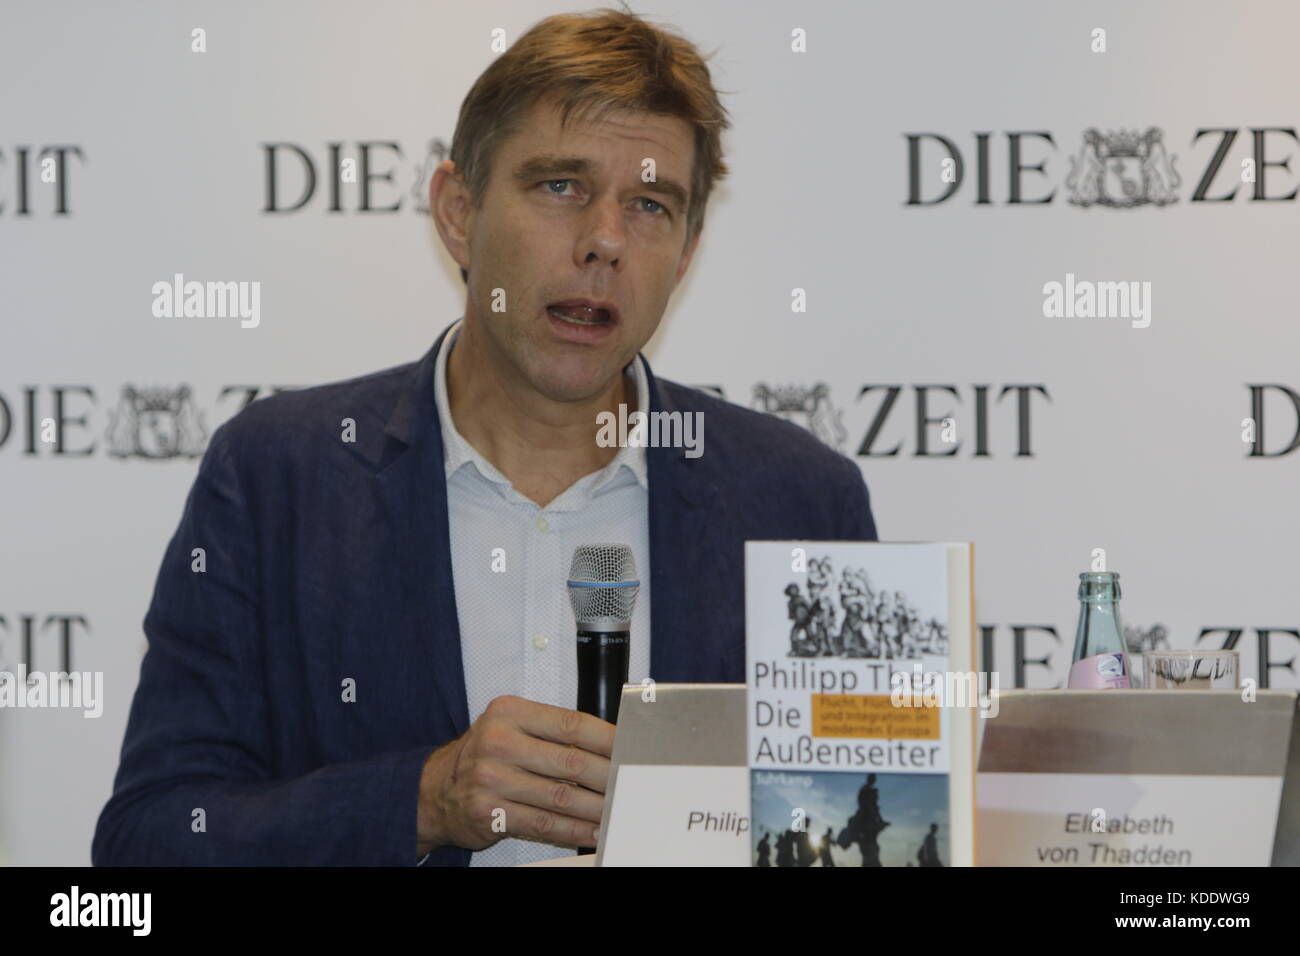 Frankfurt, Germany. 12th October 2017. Austrian historian Philipp Ther gives an interview at the booth of the German national weekly newspaper Die Zeit at the Frankfurt Book Fair. The Frankfurt Book Fair 2017 is the world largest book fair with over 7,000 exhibitors and over 250,000 expected visitors. It is open from the 11th to the 15th October with the last two days being open to the general public. Credit: Michael Debets/Alamy Live News Stock Photo